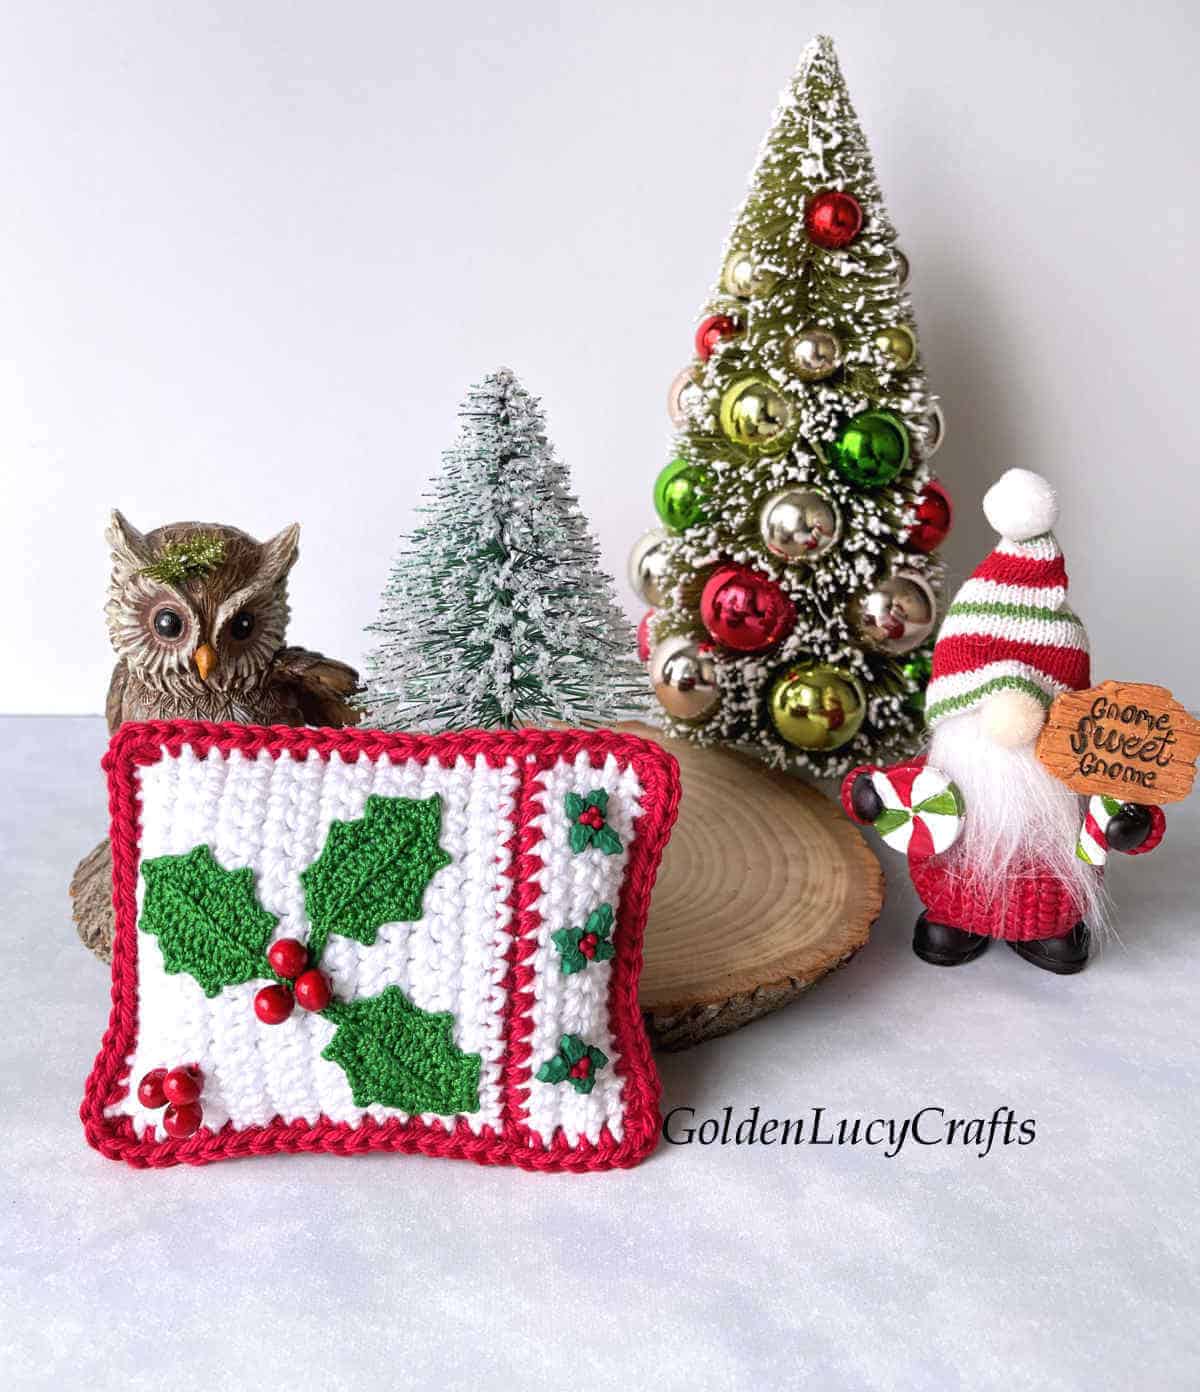 Crochet mini pillow, small Christmas trees, owl and gnome small toys.